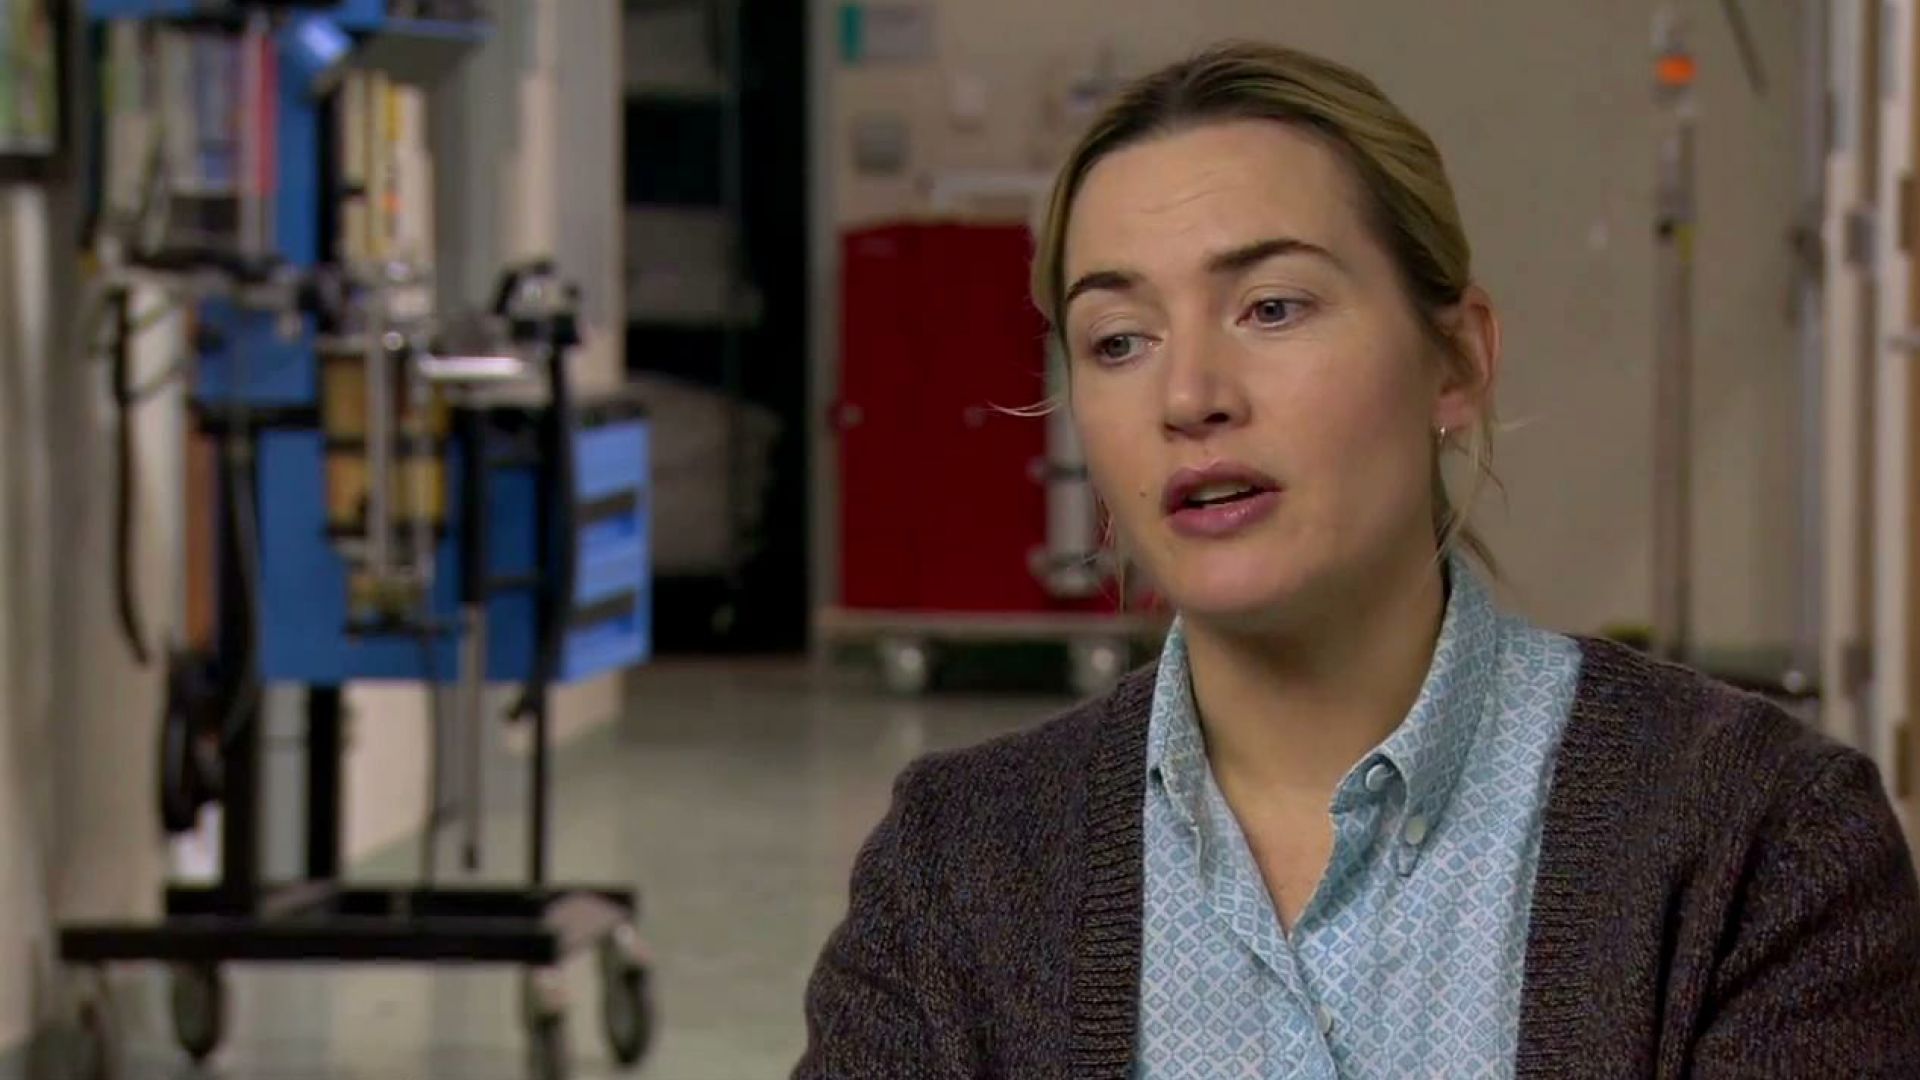 Kate Winslet on the script, Steven Soderbergh and her character in Contagion